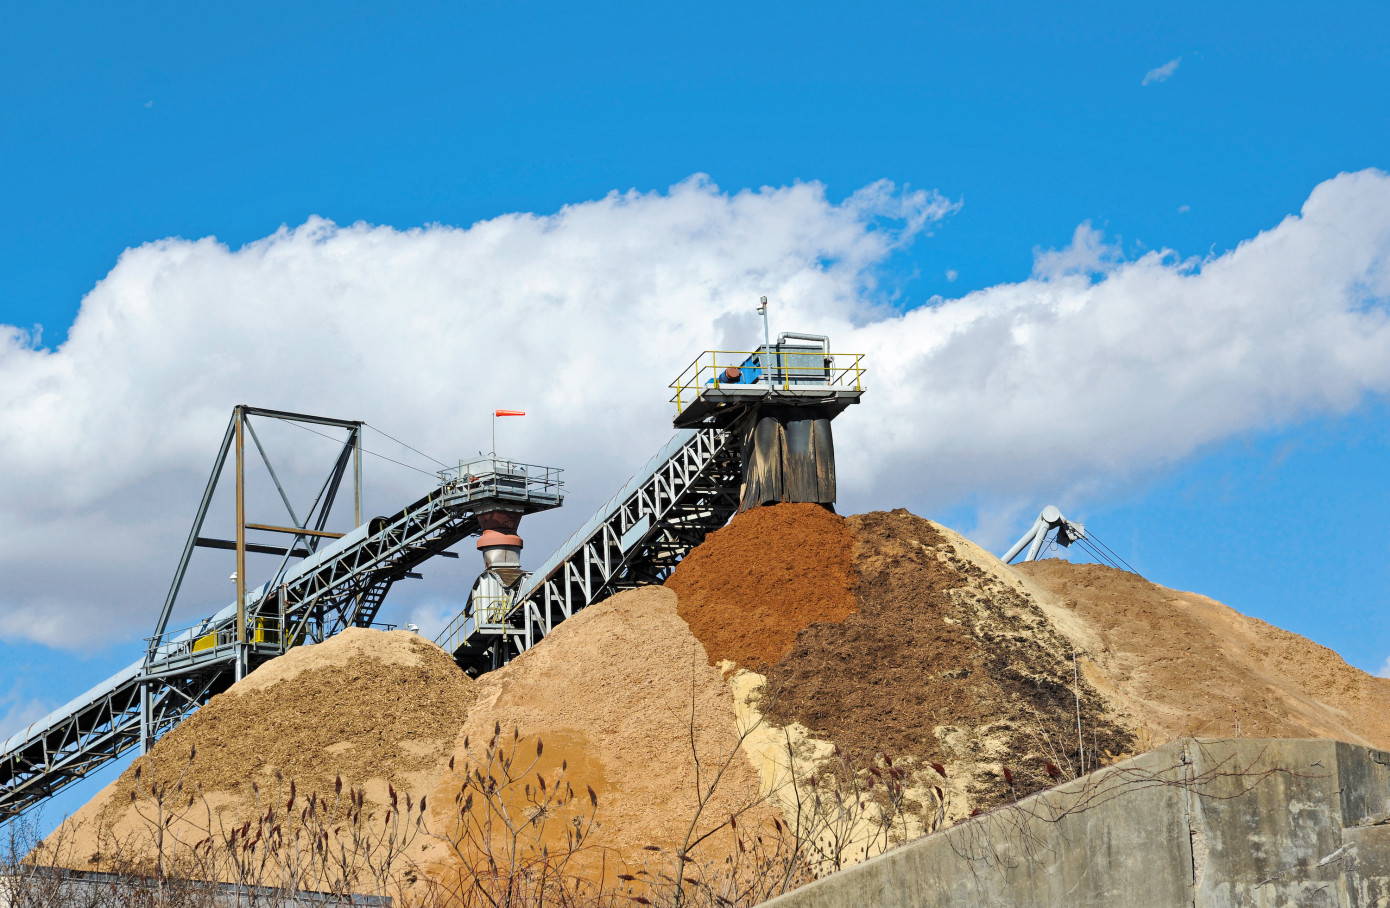 Exports of wood chips from Vietnam to China shoot 93% in February